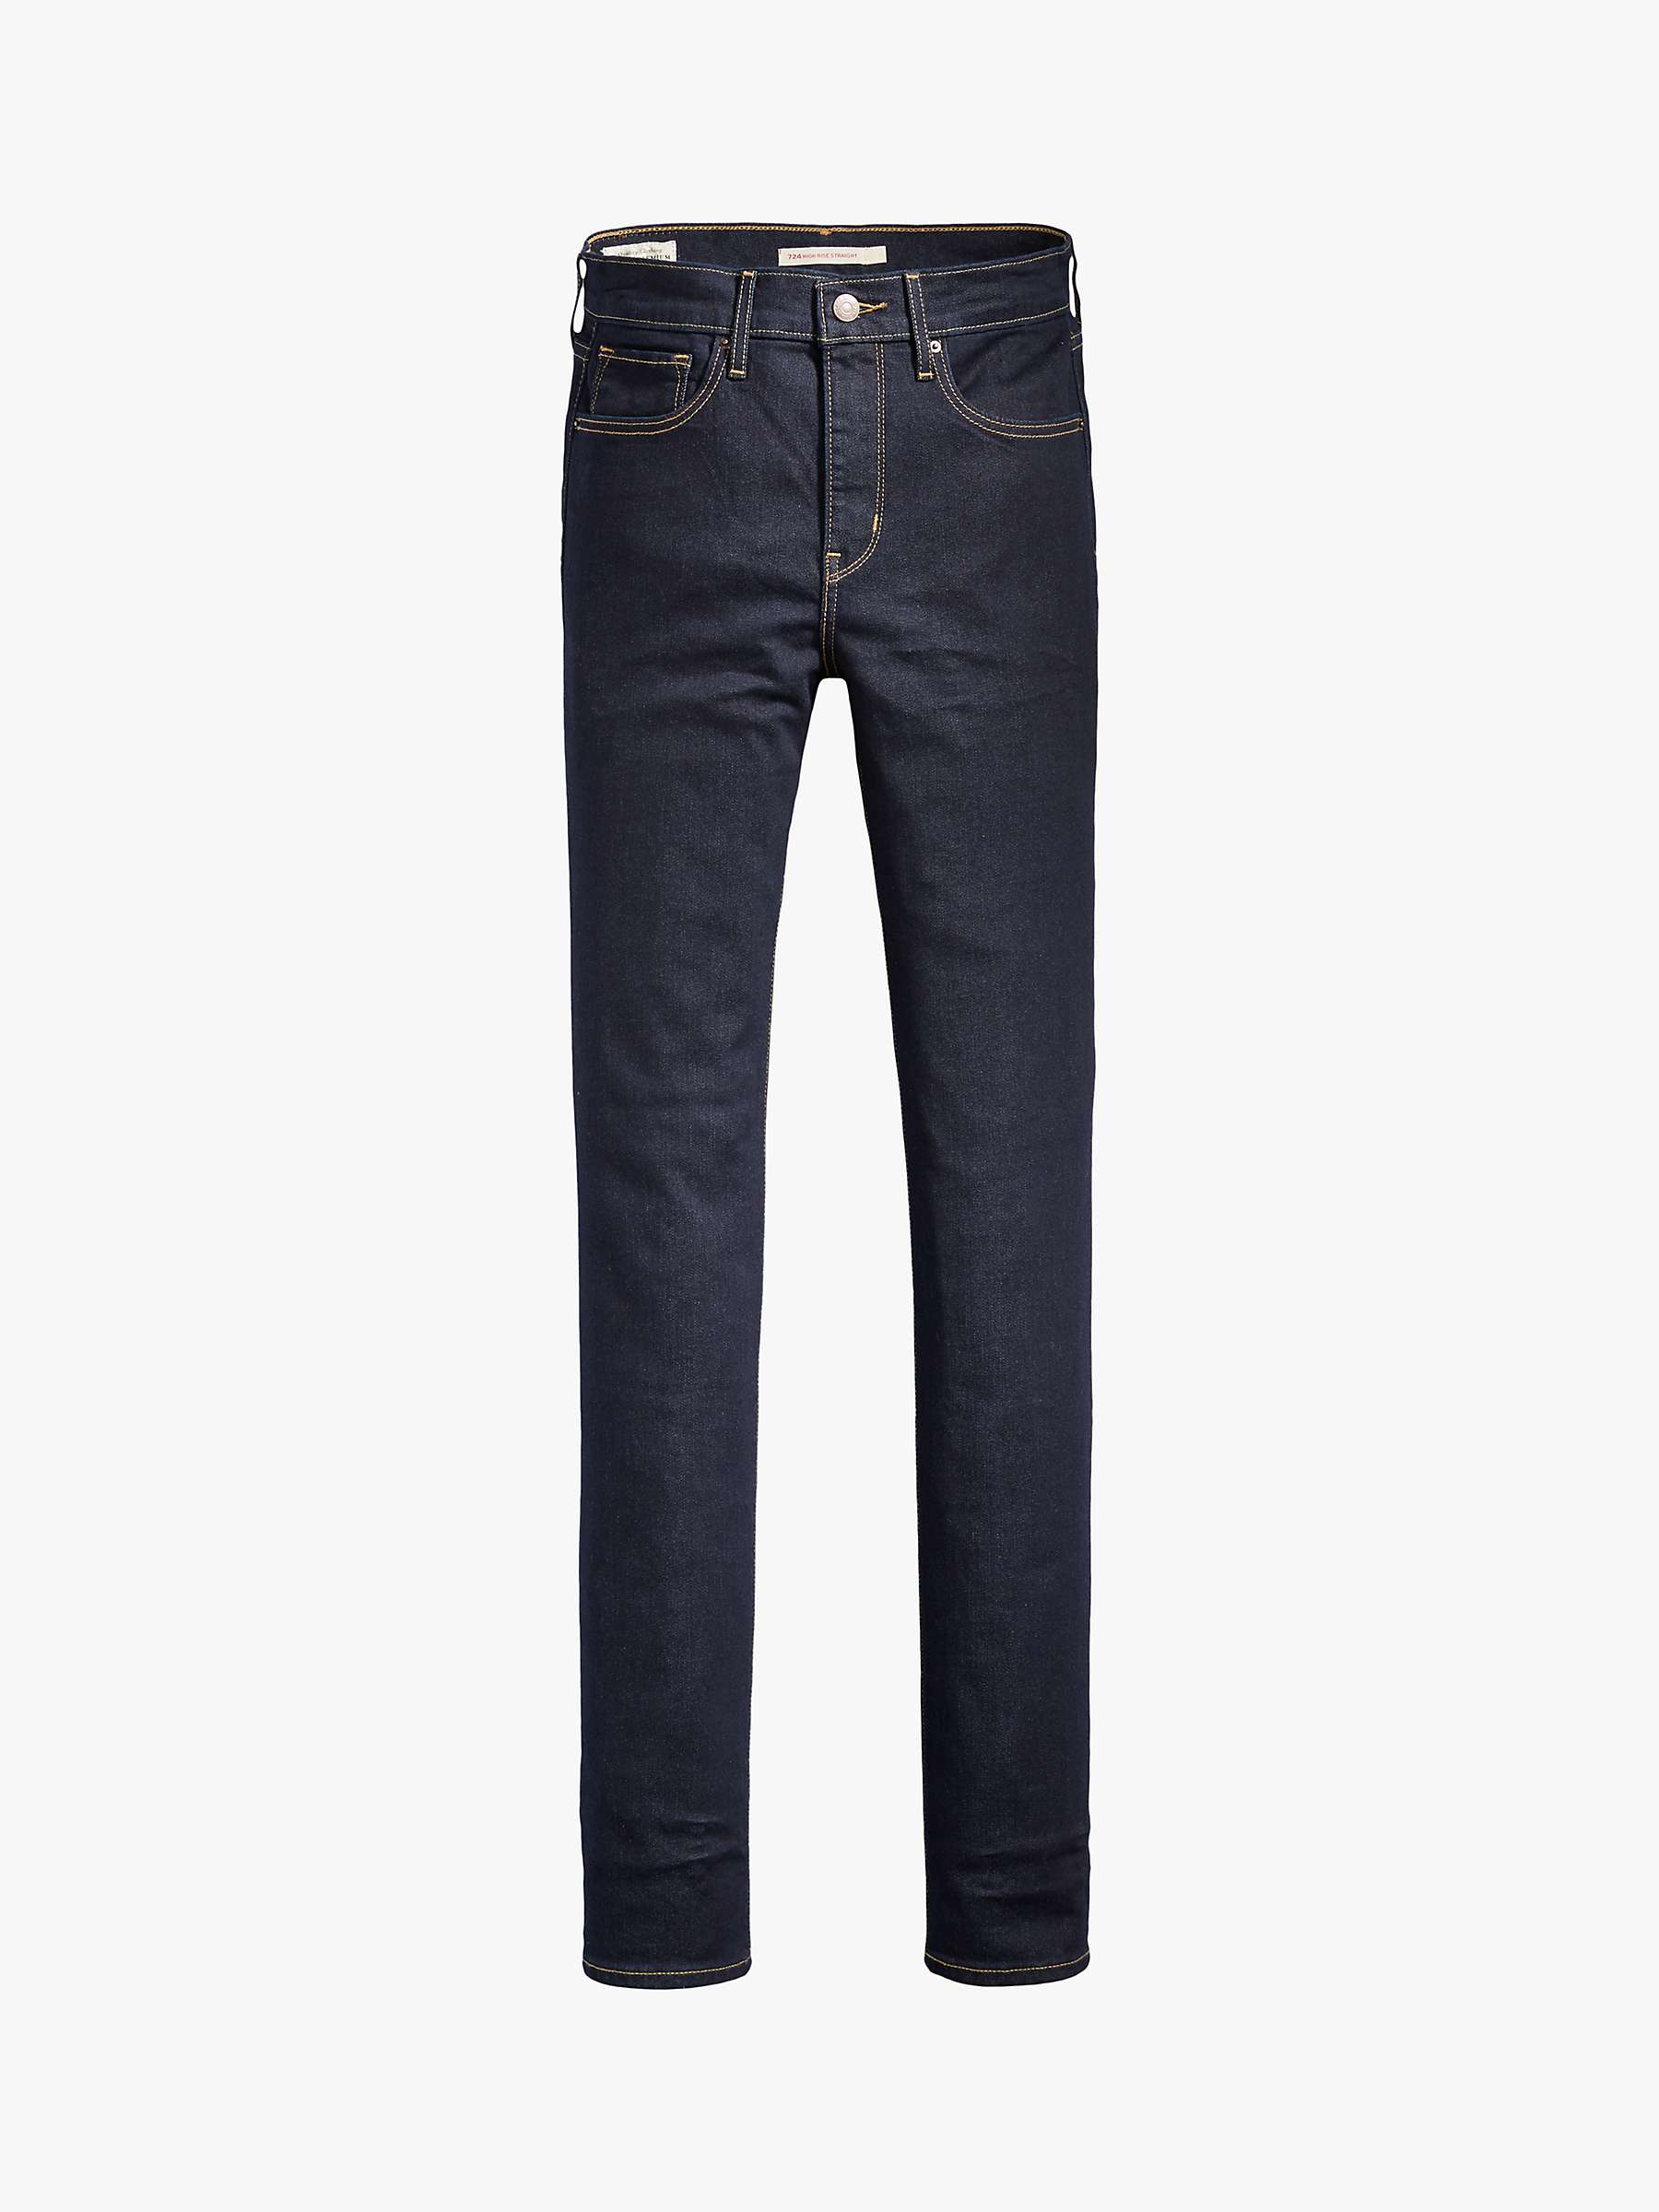 Levi's 724 High Rise Straight Cut Jeans, To The Nine at John Lewis ...